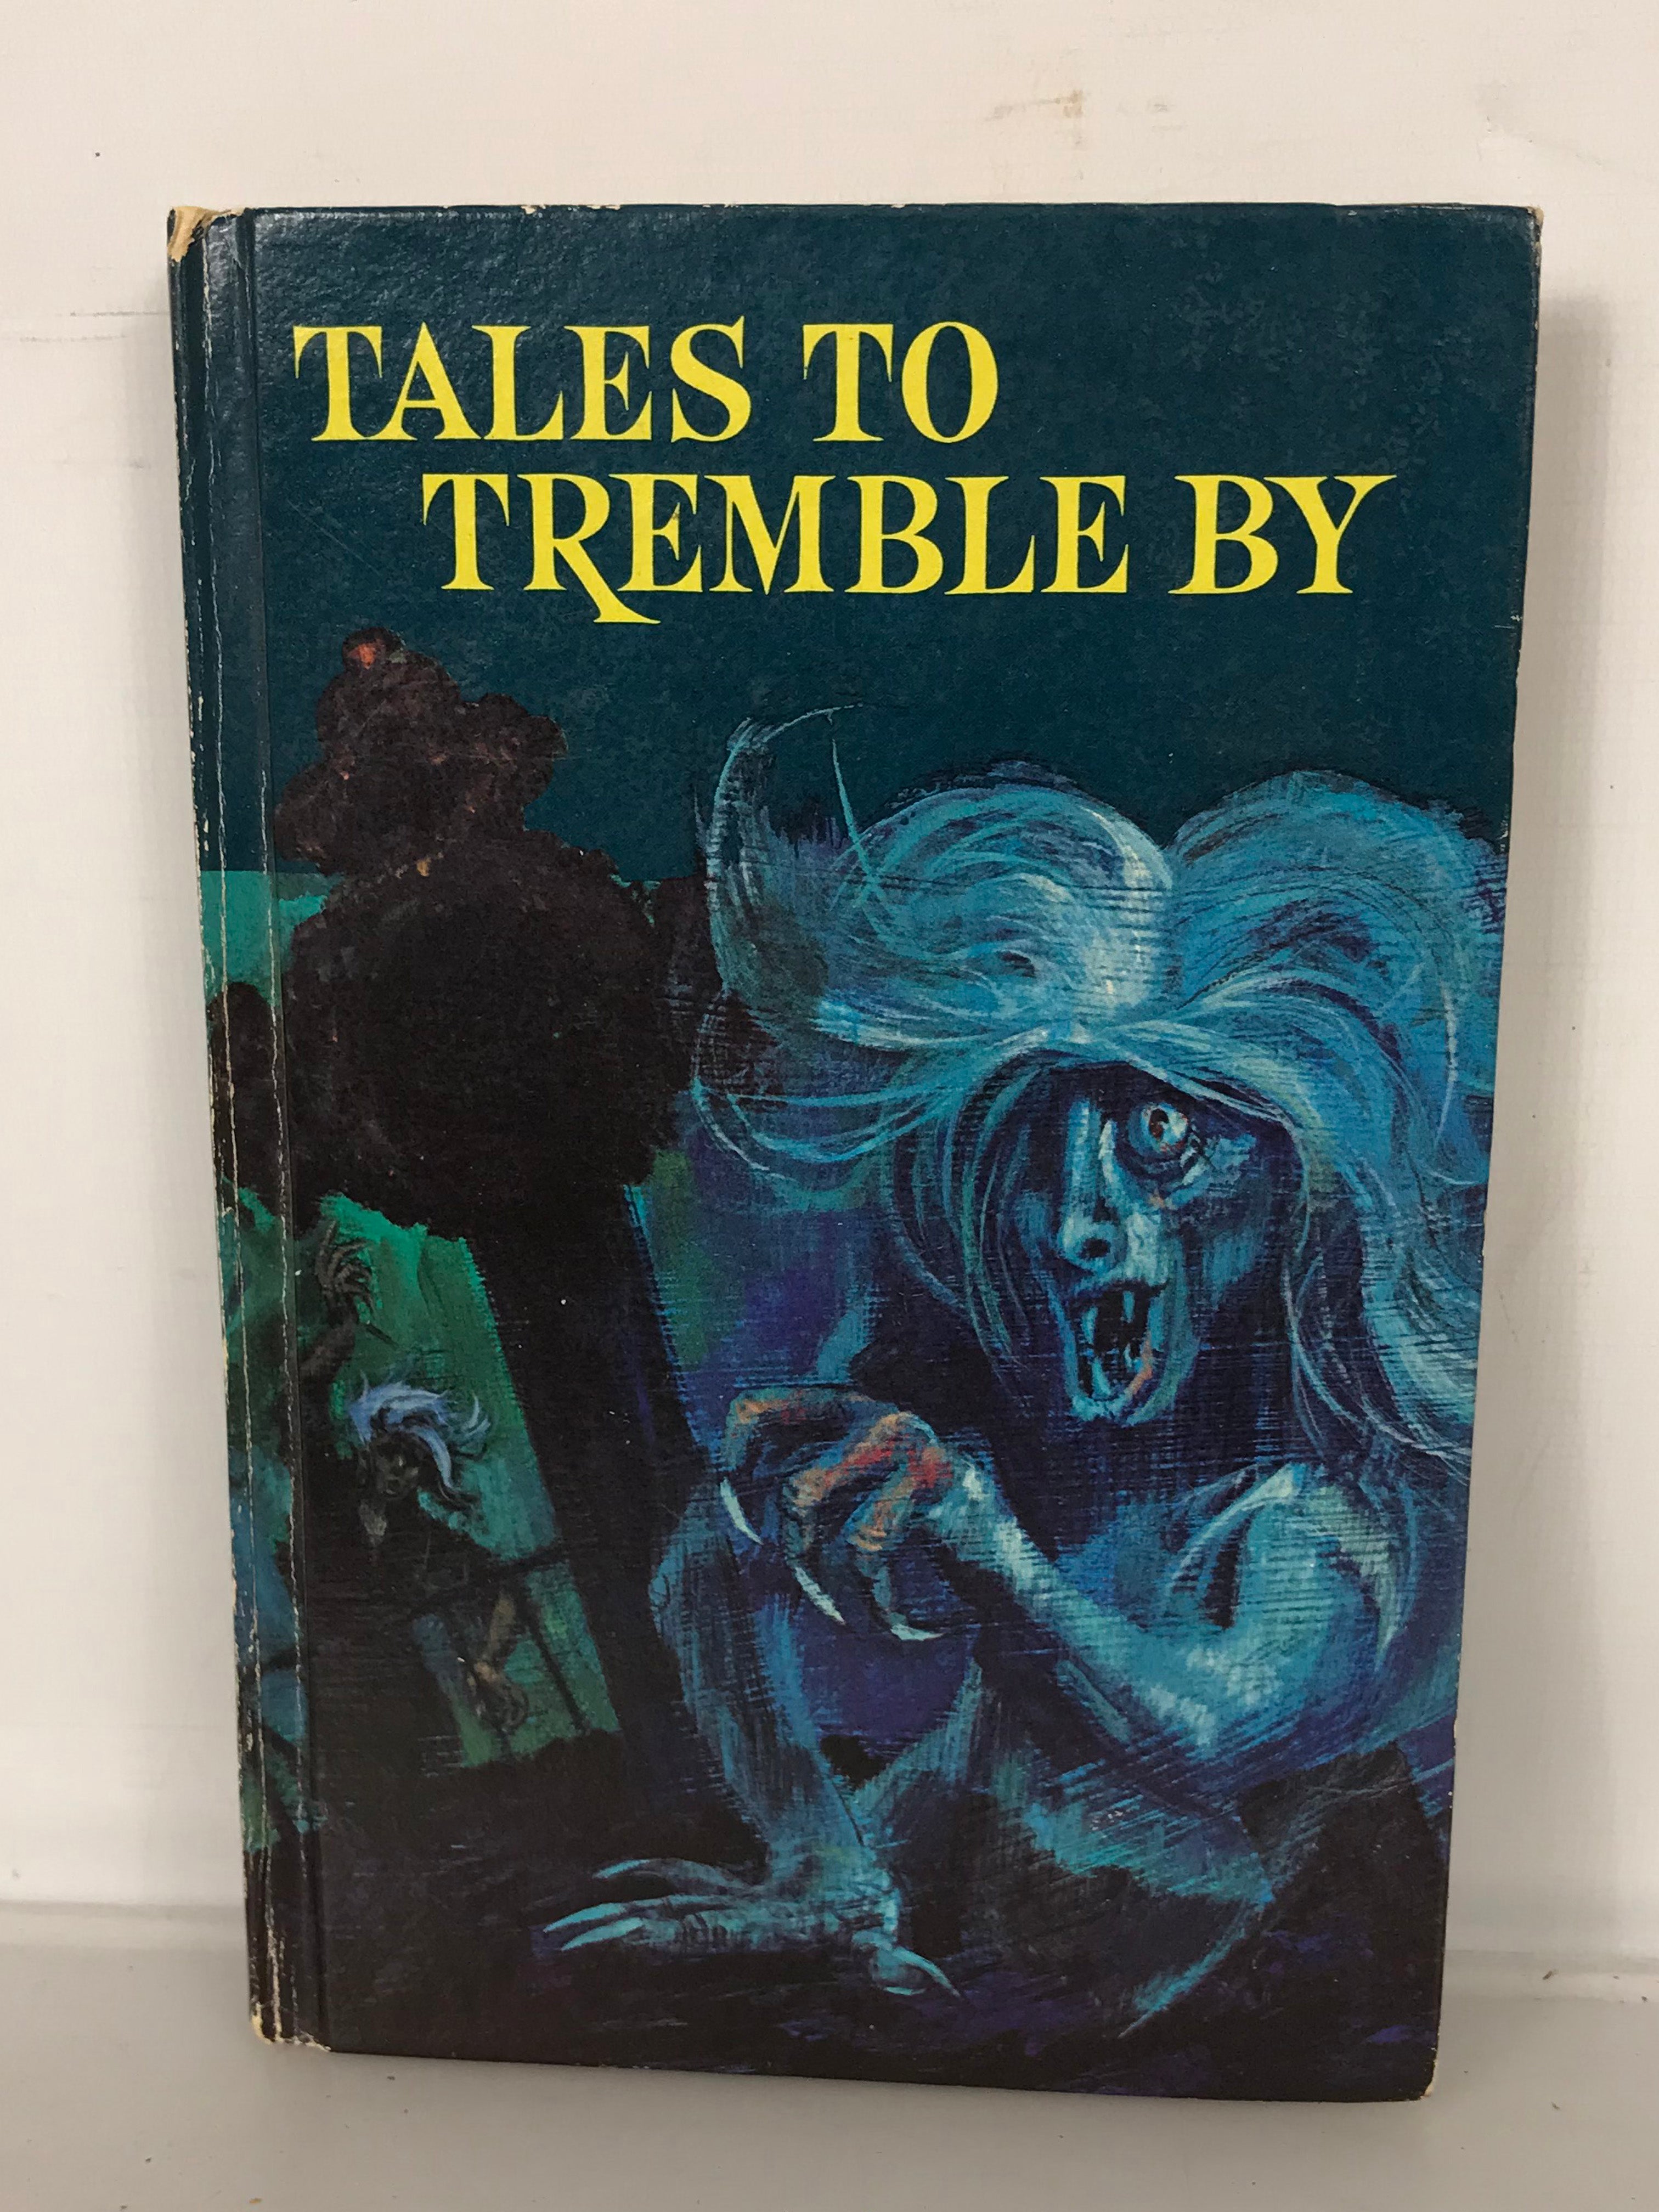 Tales to Tremble By Whitman Book 1966 HC